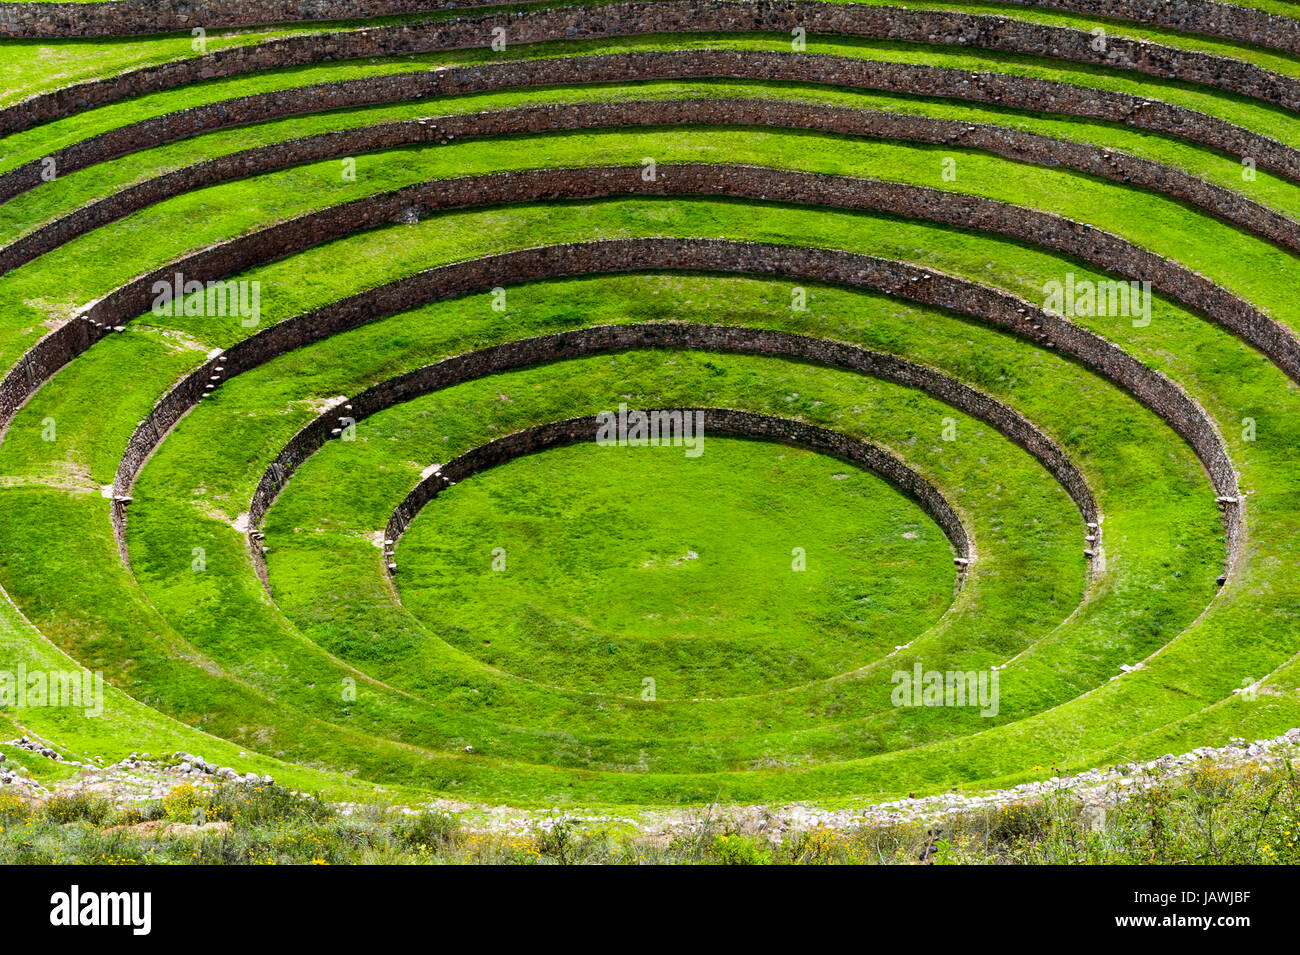 An Inca site with stone wall terraces for growing agricultural crops by creating microclimates. Stock Photo